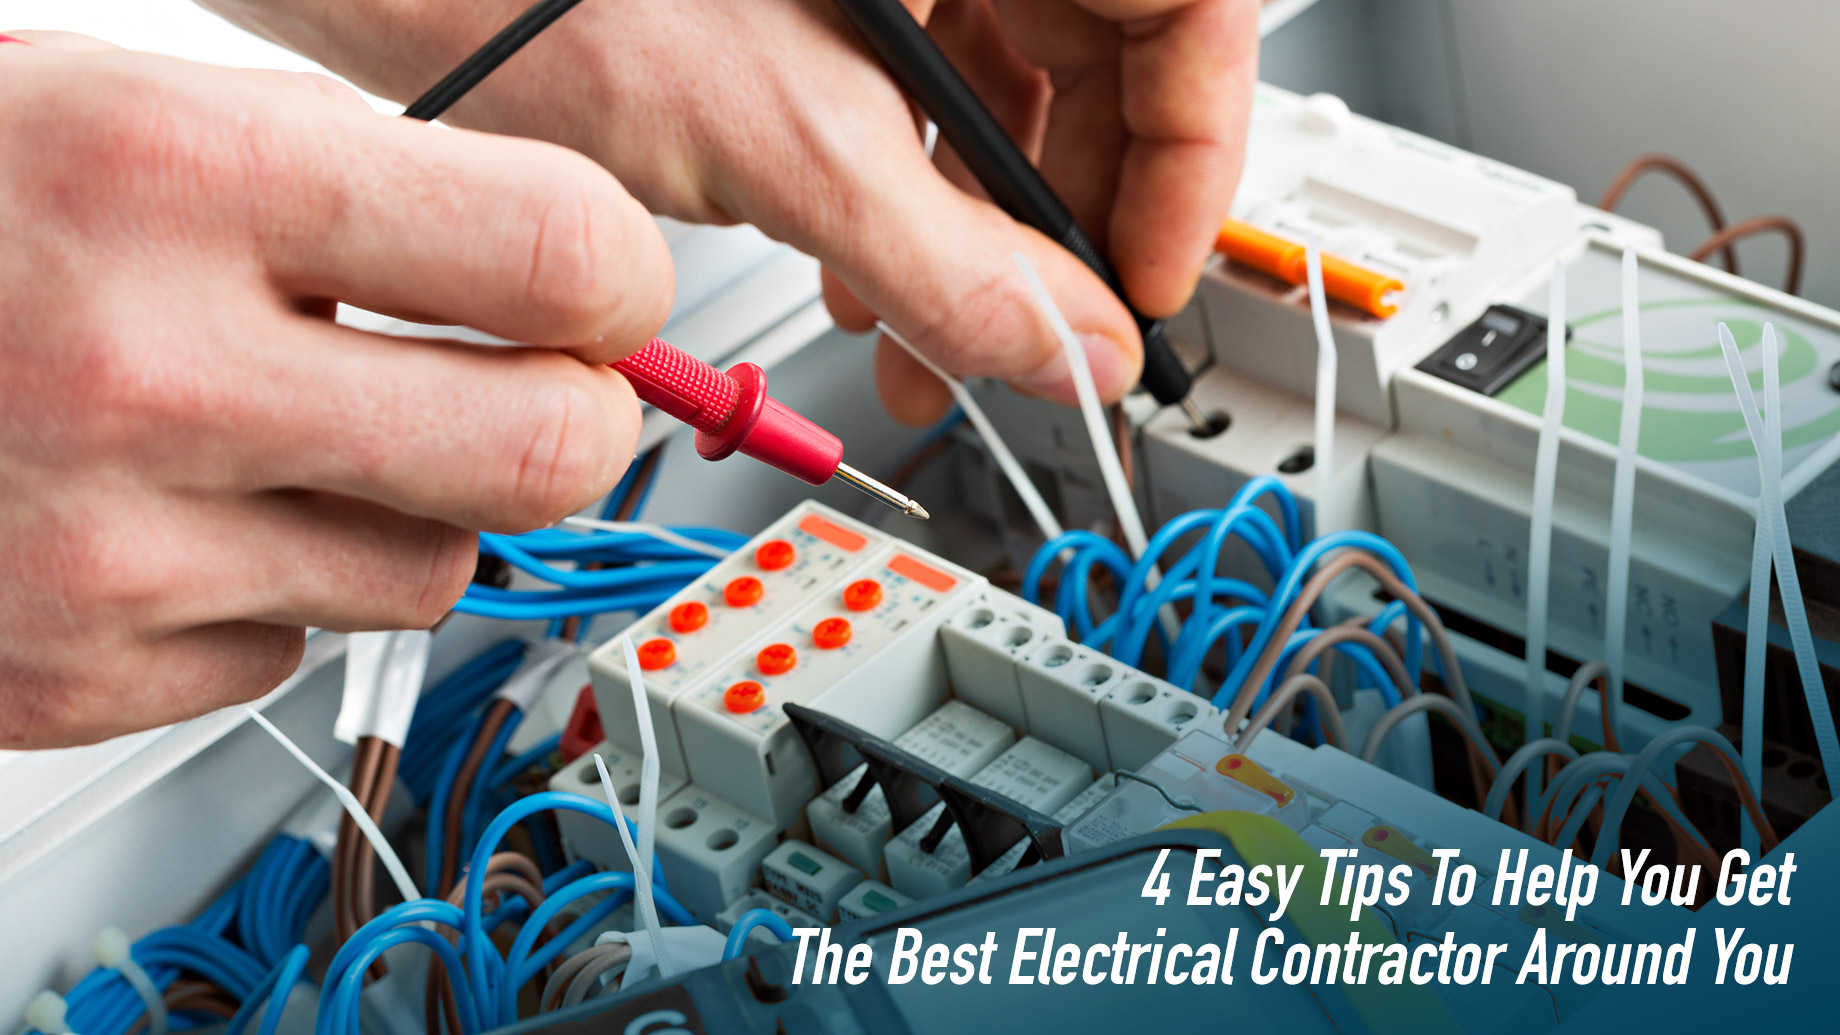 4 Easy Tips To Help You Get The Best Electrical Contractor Around You